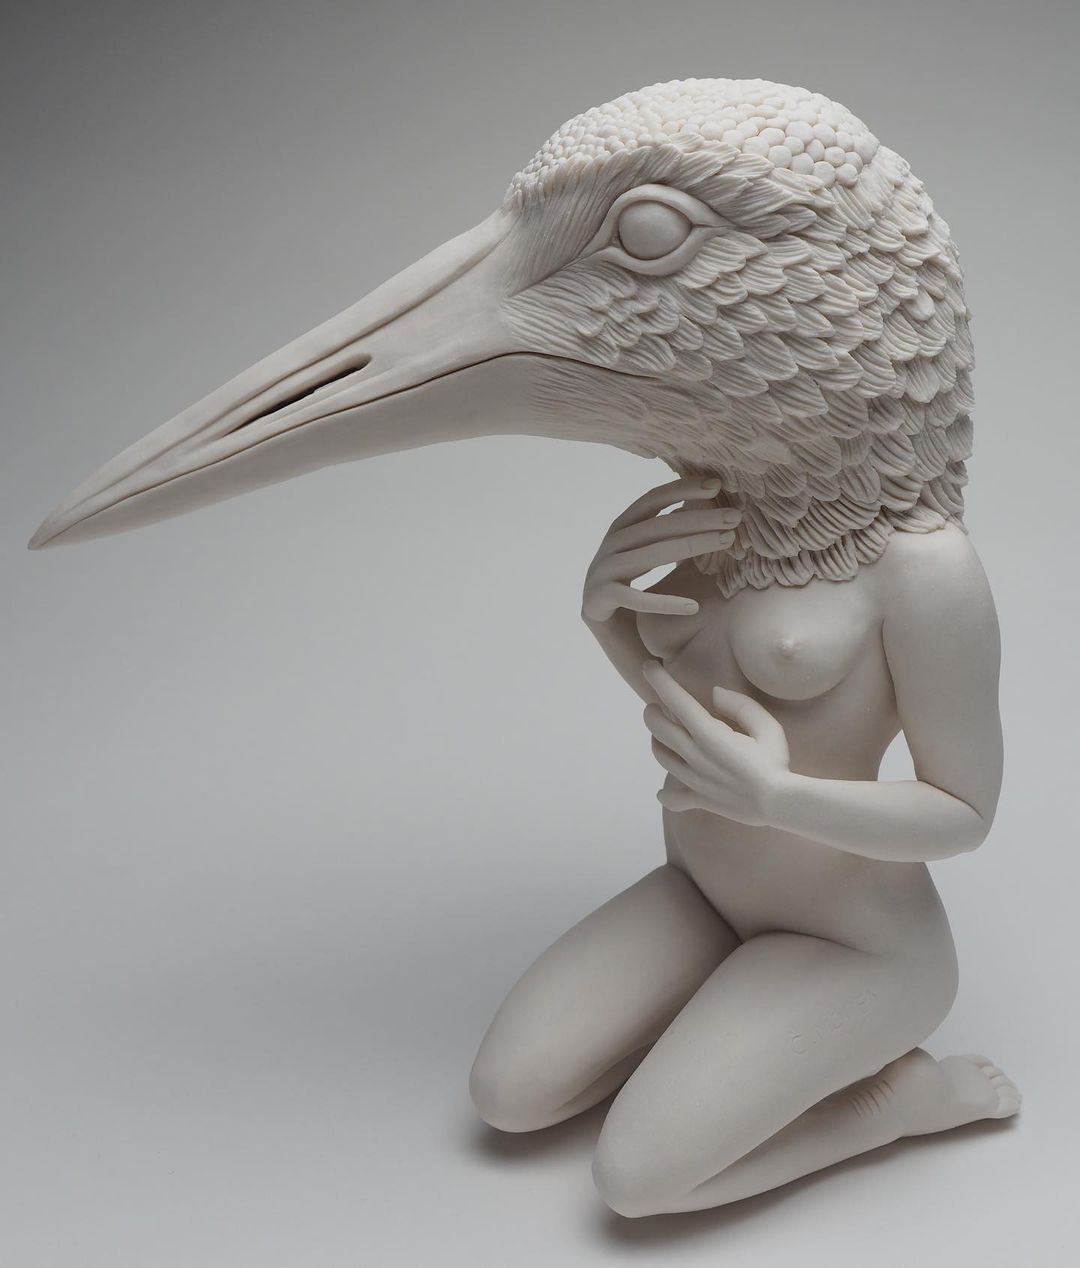 Fabulous Sculptures Of Human Animal Hybrids By Crystal Morey 8